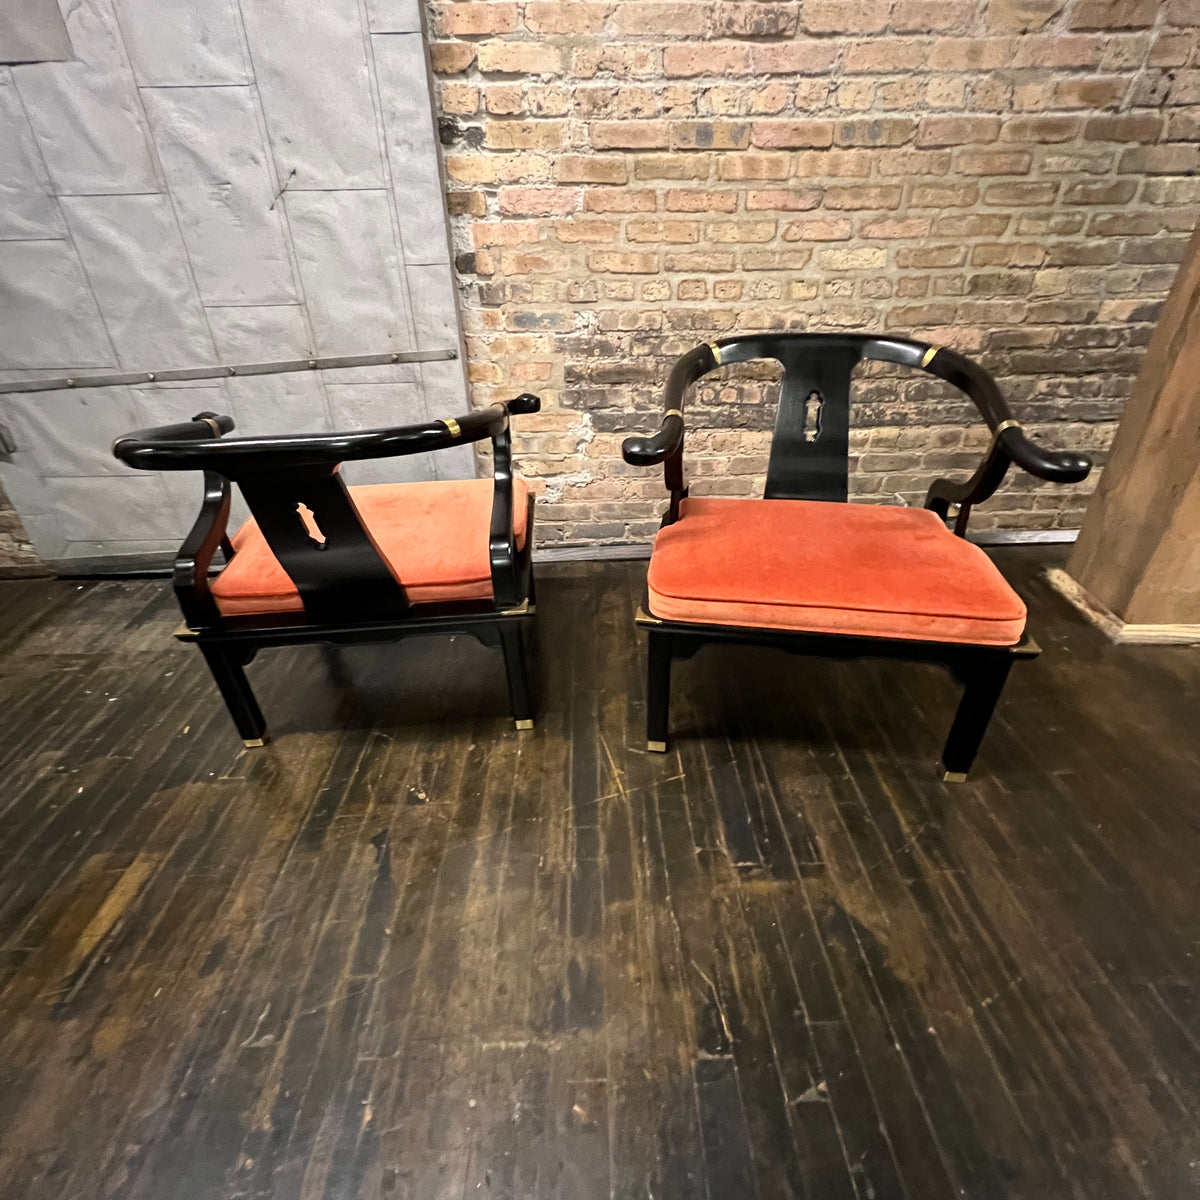 A lovely pair of large Chinese ming style horseshoe lounge chairs made by Century Furniture. Originally designed by James Mont these chairs epitomize his over the top dramatic mid-century modern style with a unique Asian flare. 